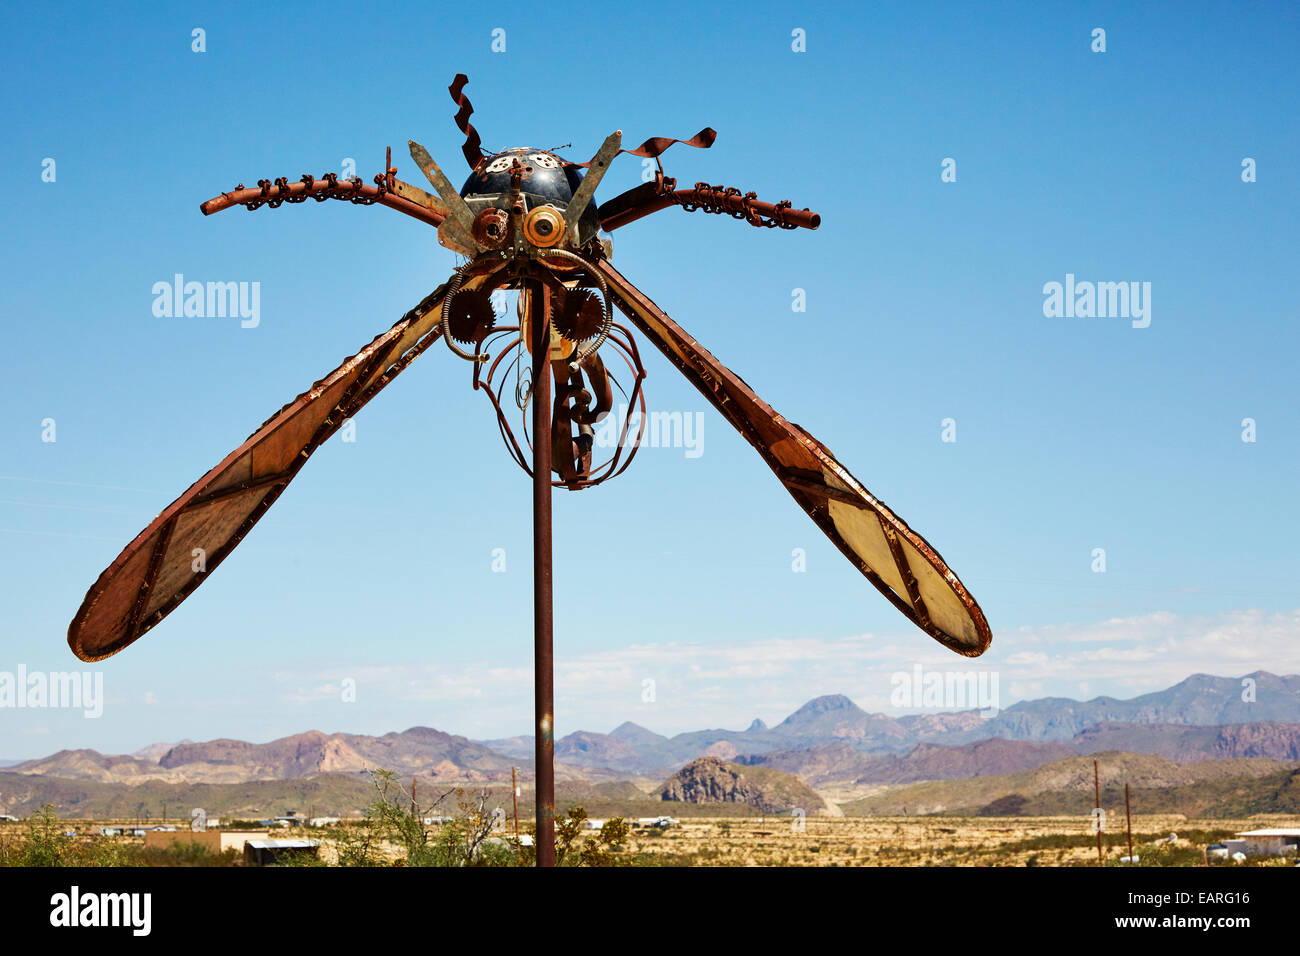 Sculpture at Terlingua Ghost Town, Texas Stock Photo